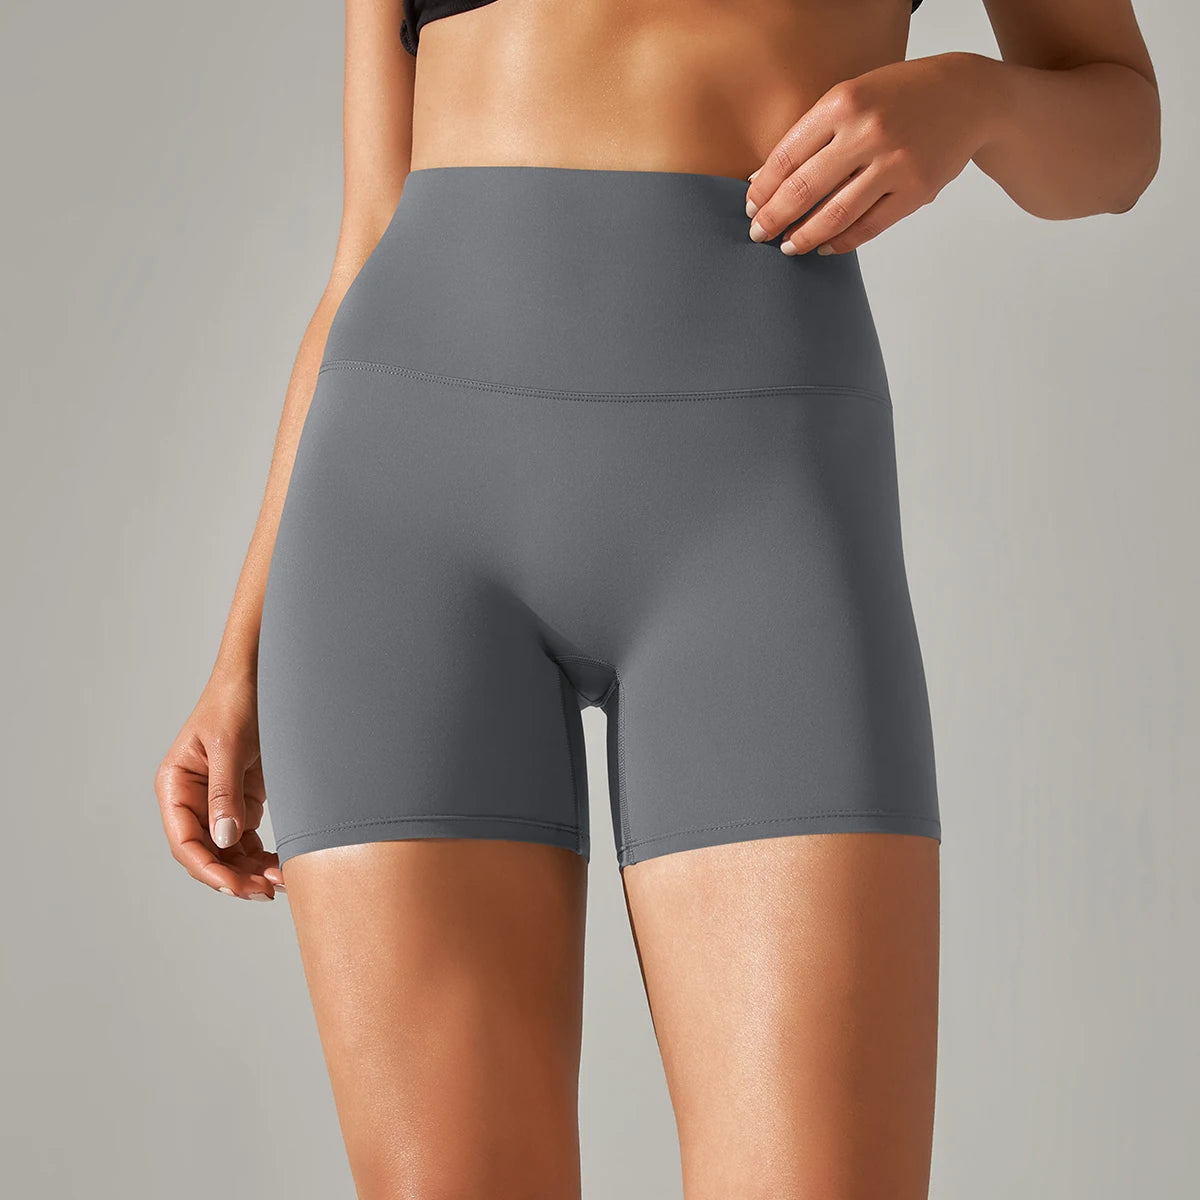 Yoga Shorts for Women | Fitness Running Cycling Shorts | Breathable Sports Leggings | High Waist Summer Workout Gym Shorts ShopOnlyDeal